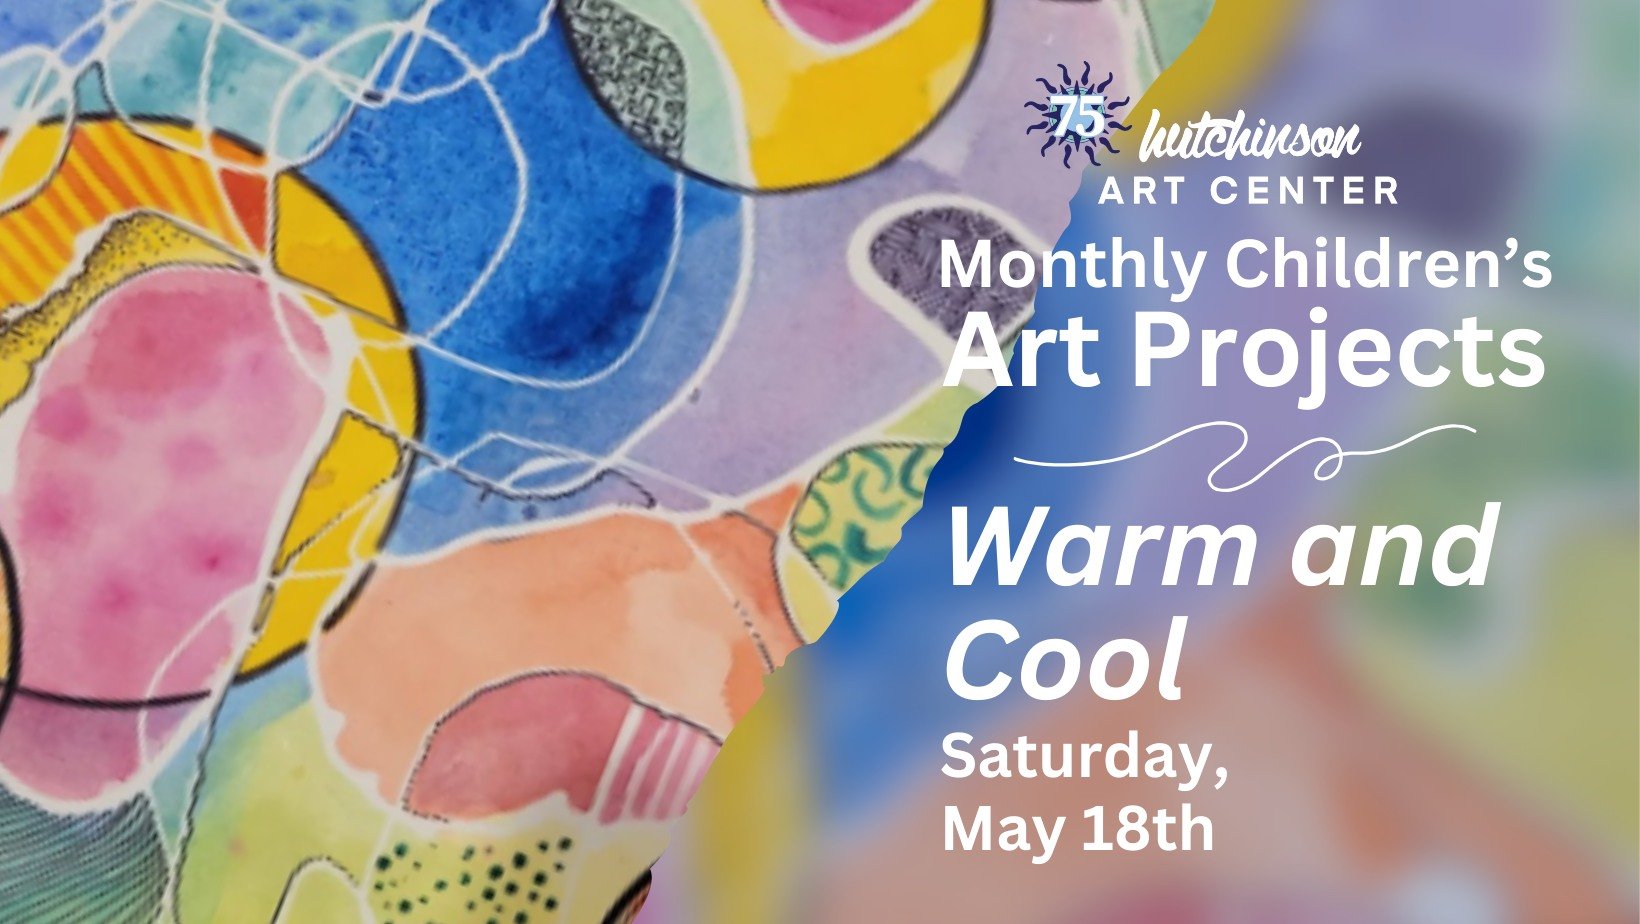 Join us at the Hutchinson Art Center for this month&rsquo;s make-and-take art projects for children on Saturday, May 18th at the Hutchinson Art Center. This is an opportunity for children aged 6 through 12 to create their own work of art! Students wi